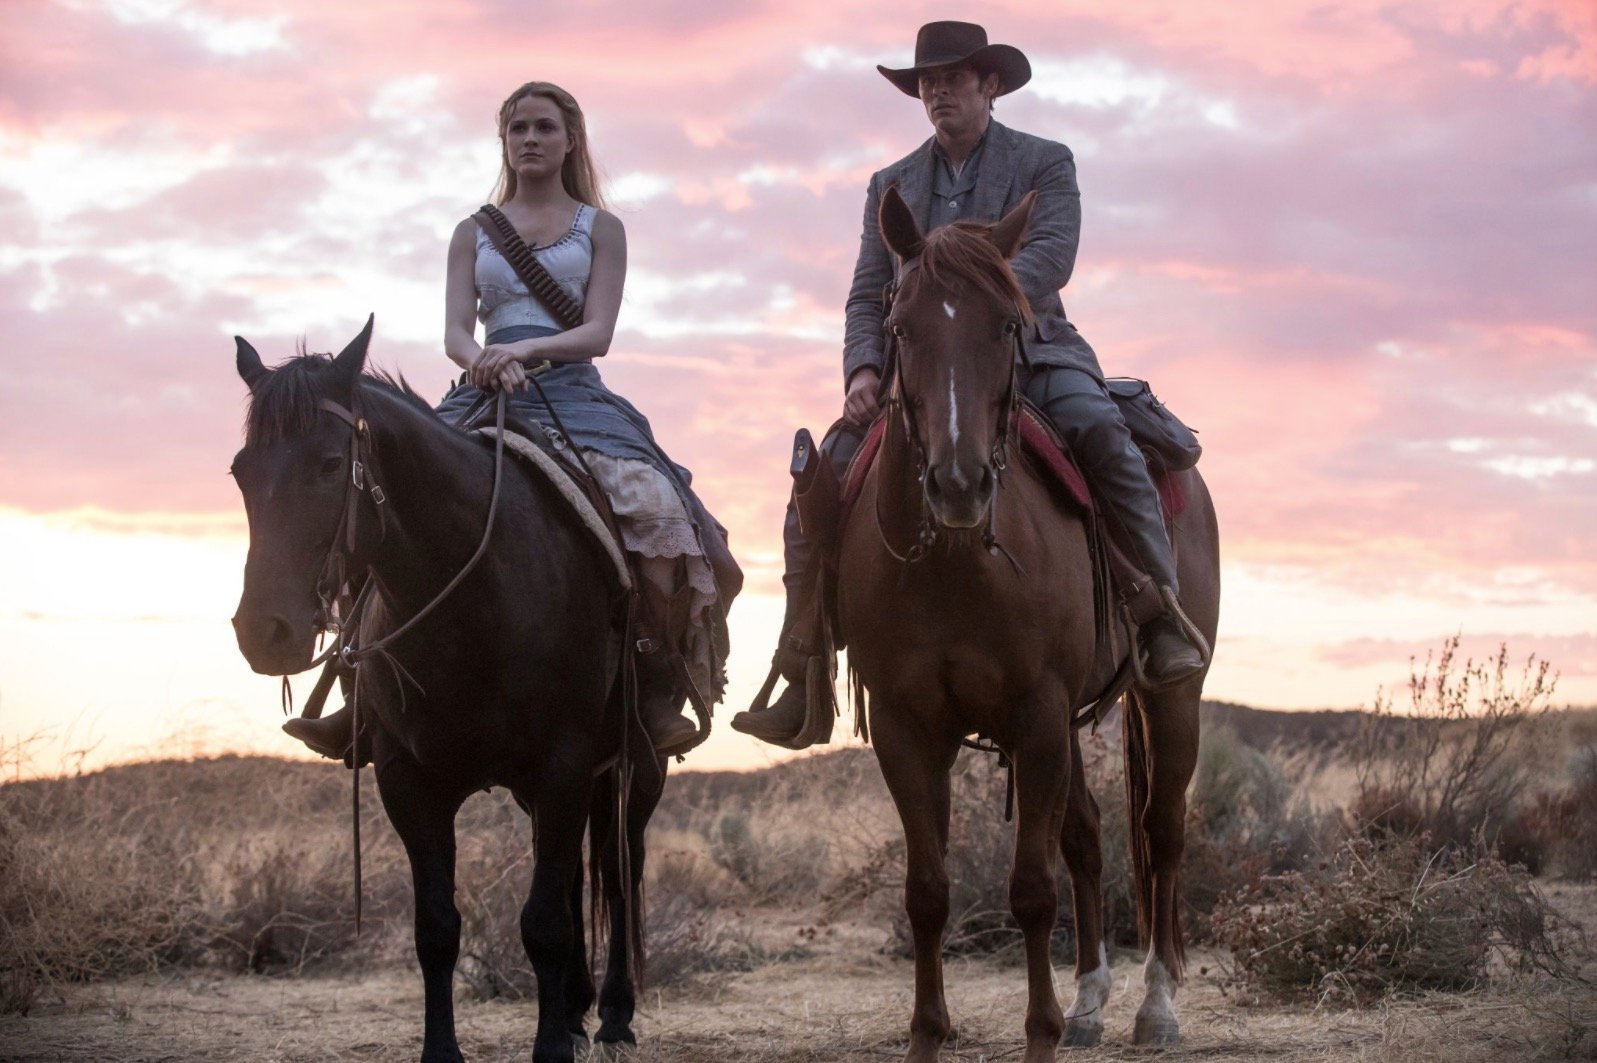 How to watch Westworld Season 2 for free.